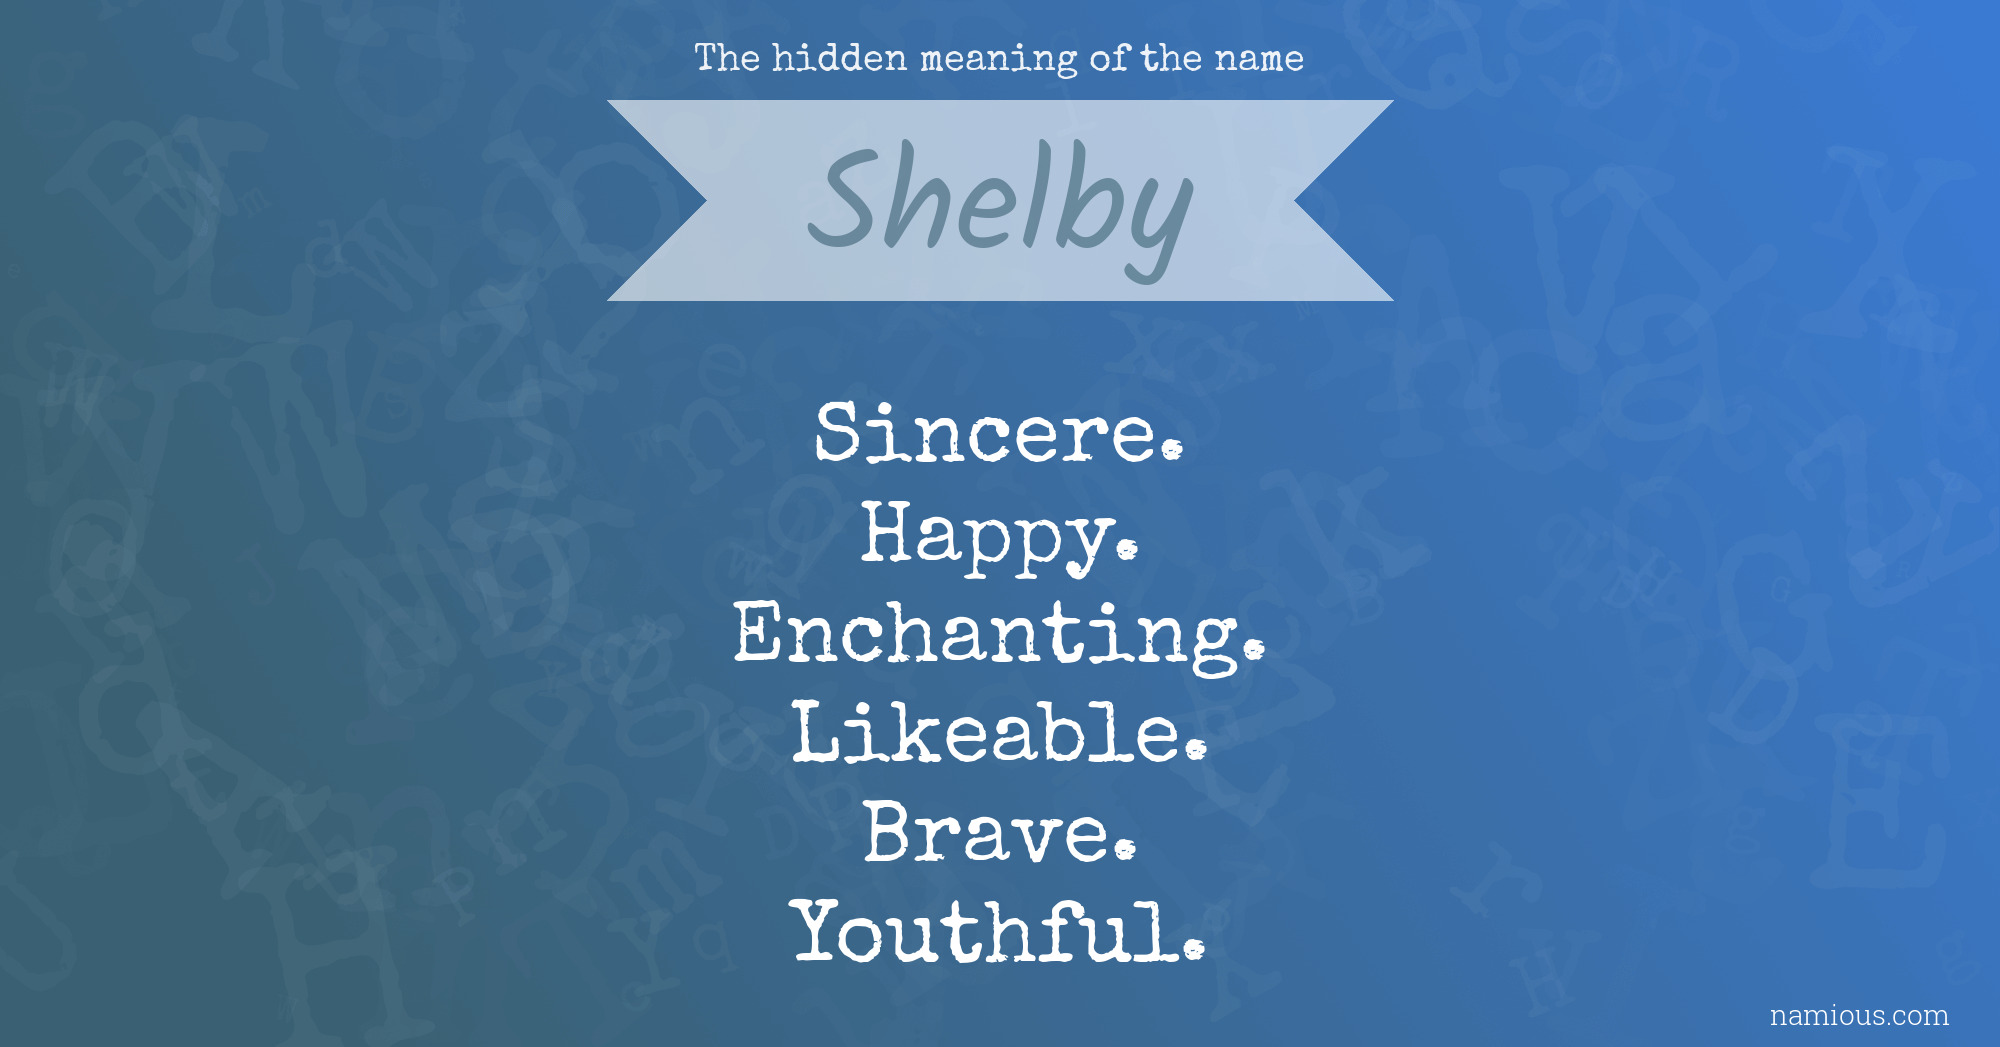 The hidden meaning of the name Shelby